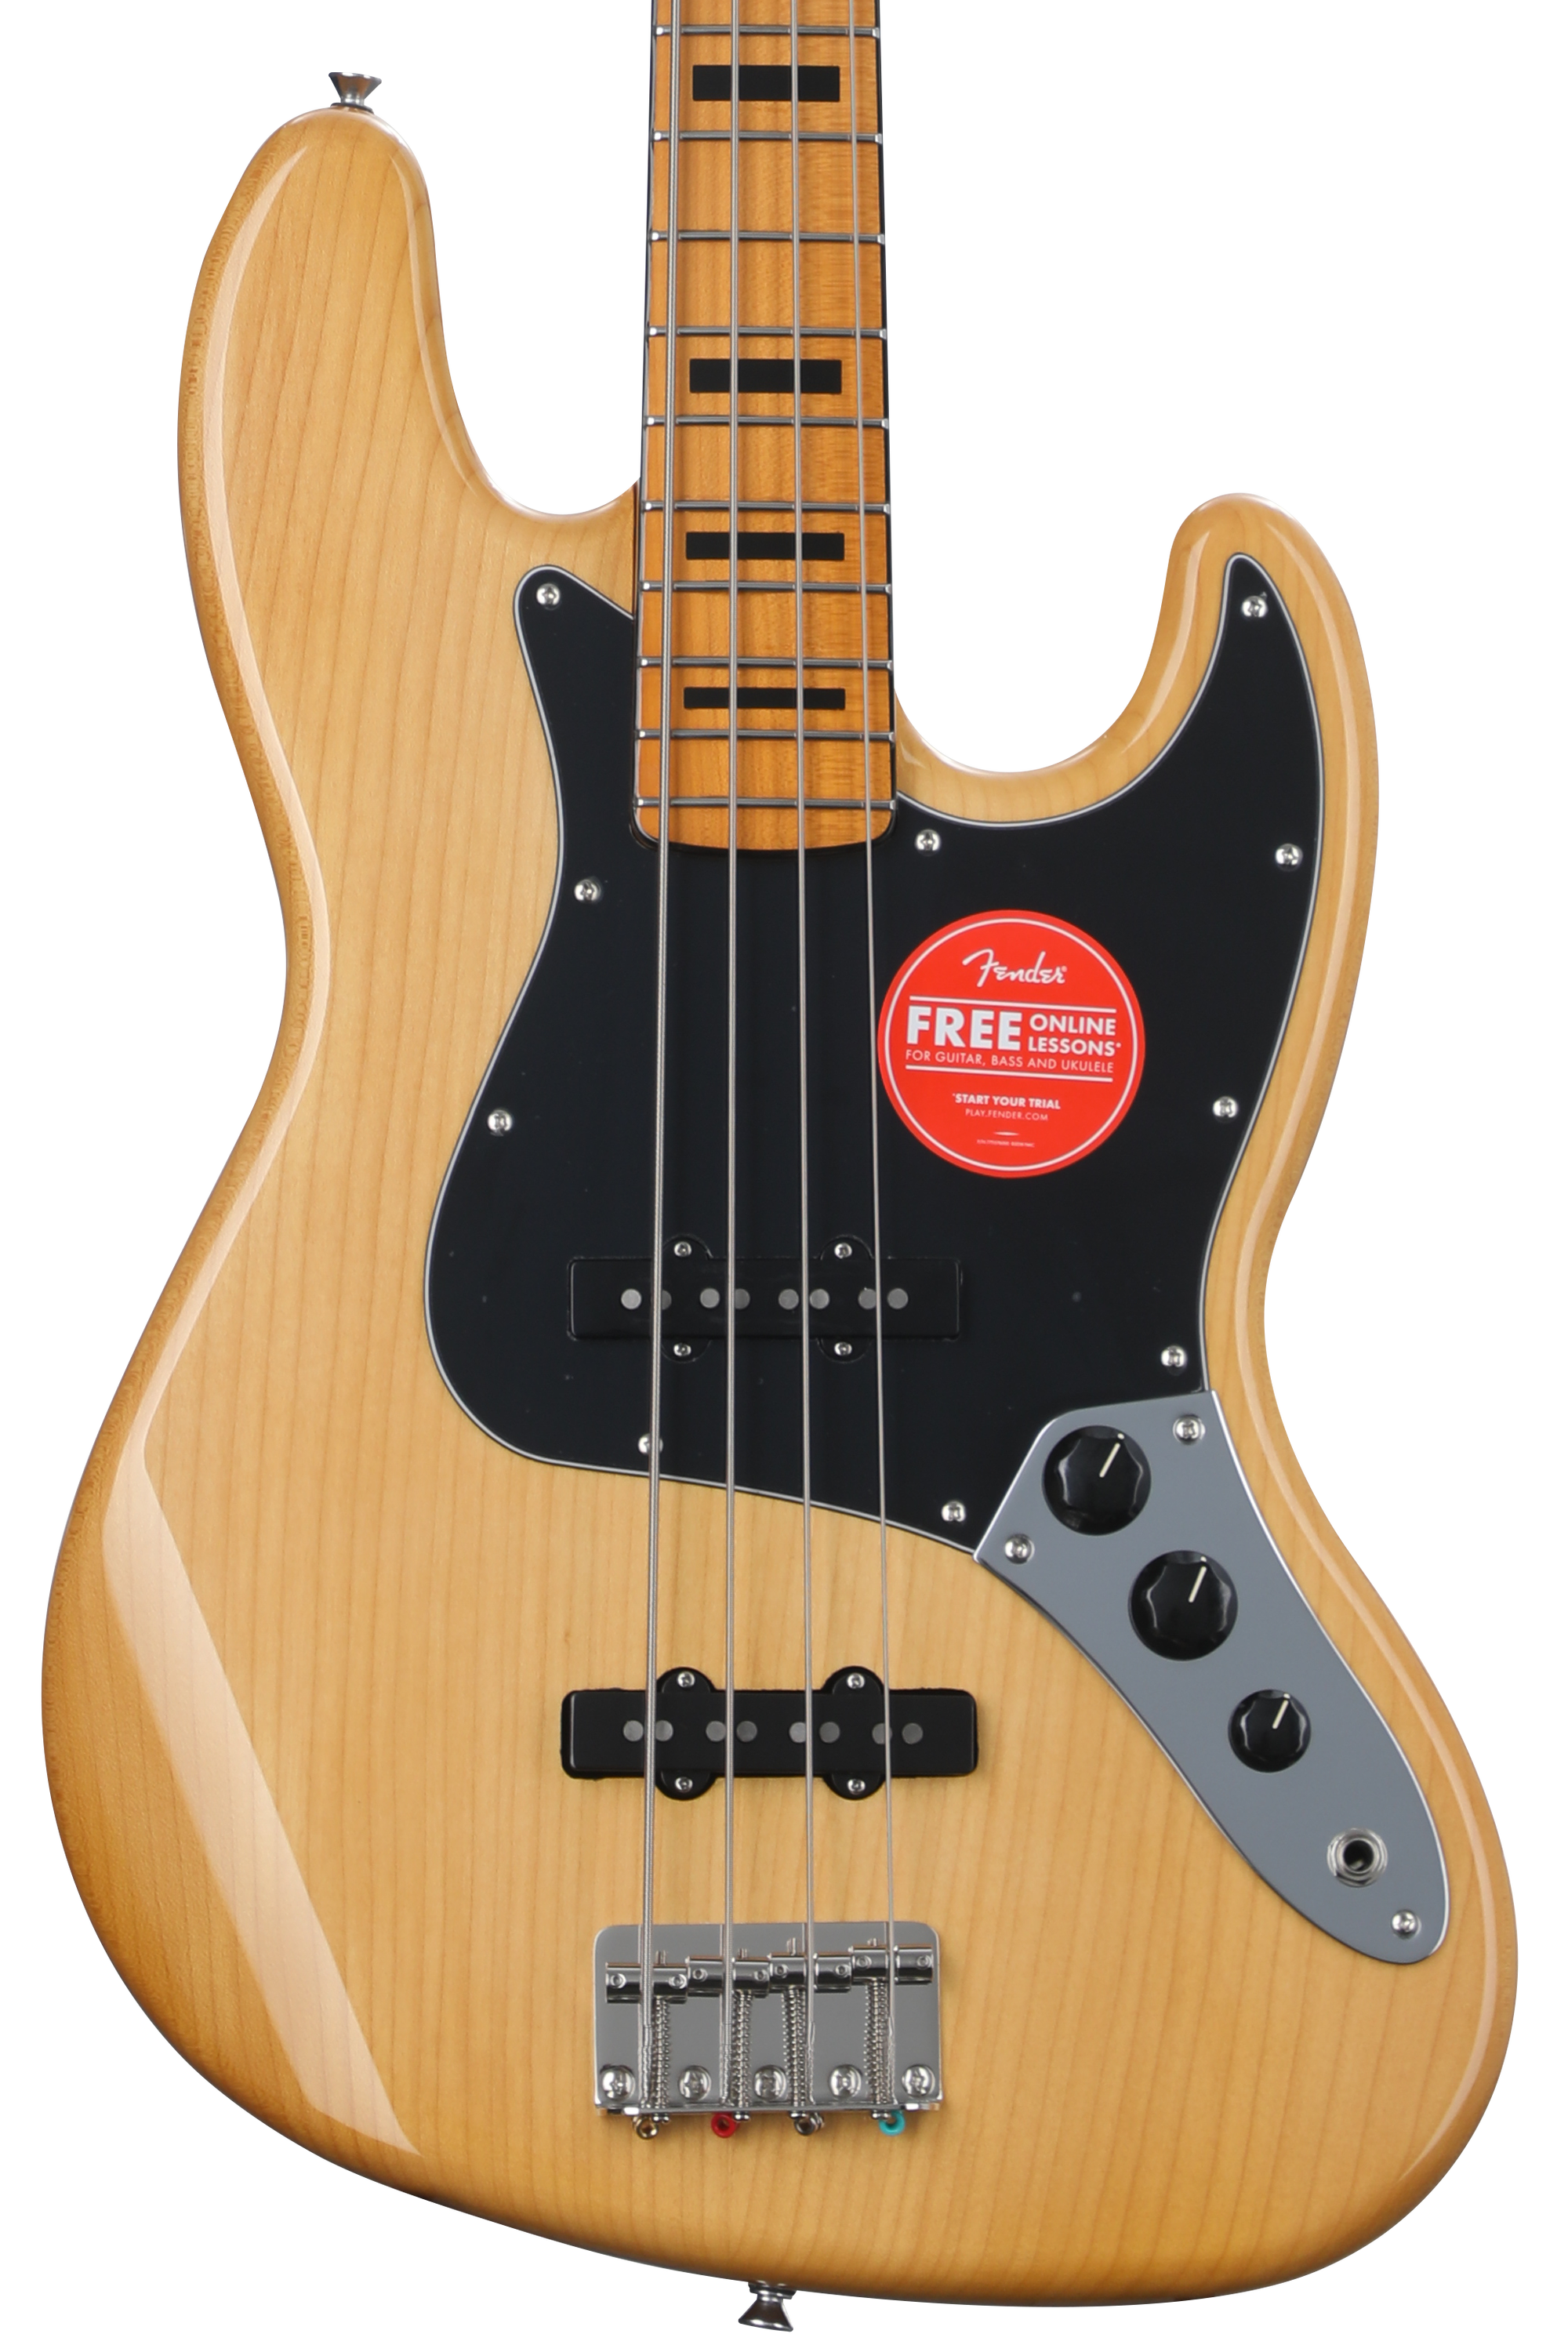 Squier Classic Vibe '70s Jazz Bass - Natural | Sweetwater